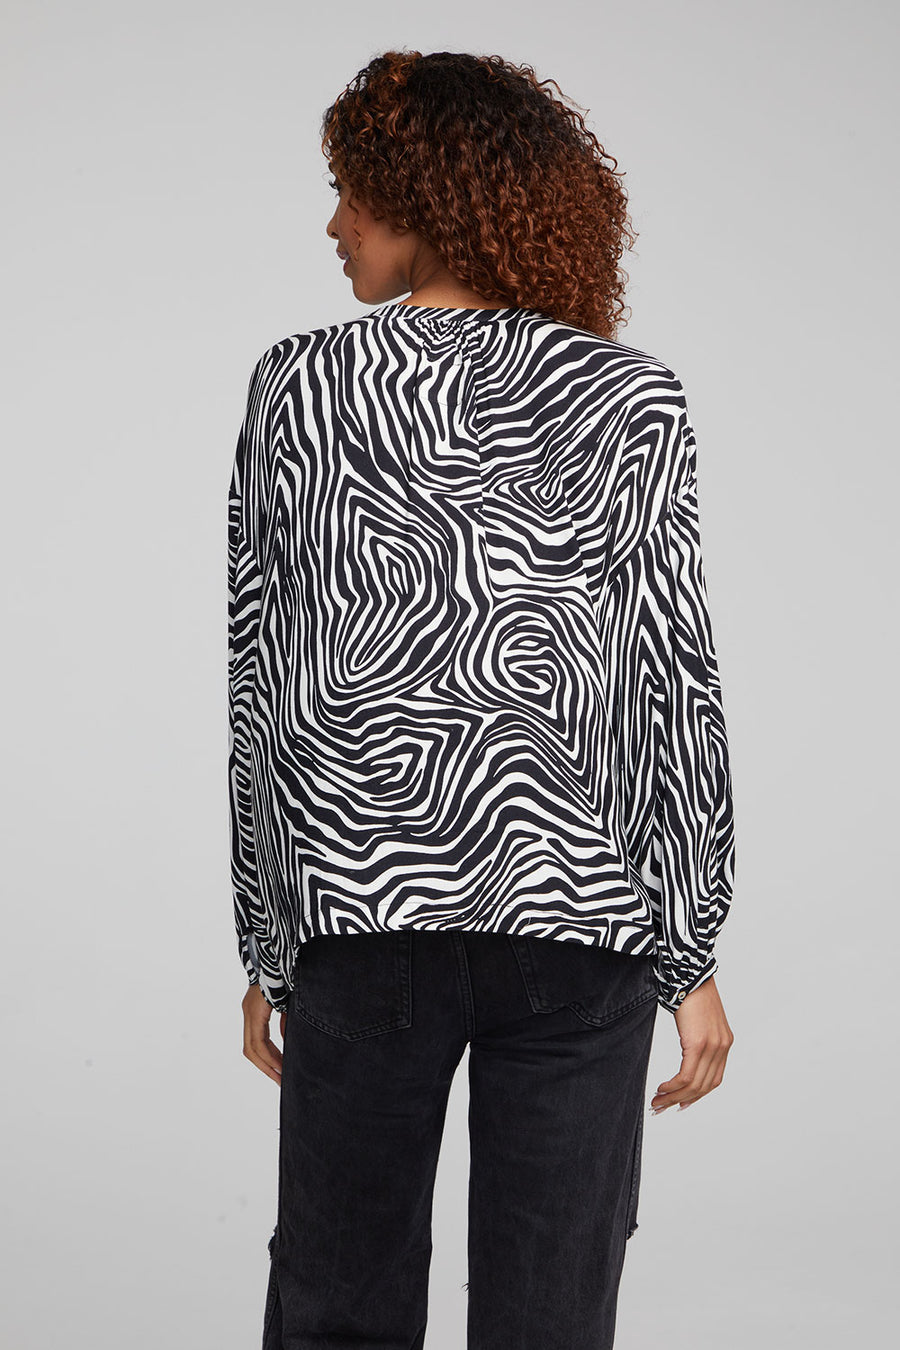 Idol "Wild Thing" Blouse WOMENS chaserbrand